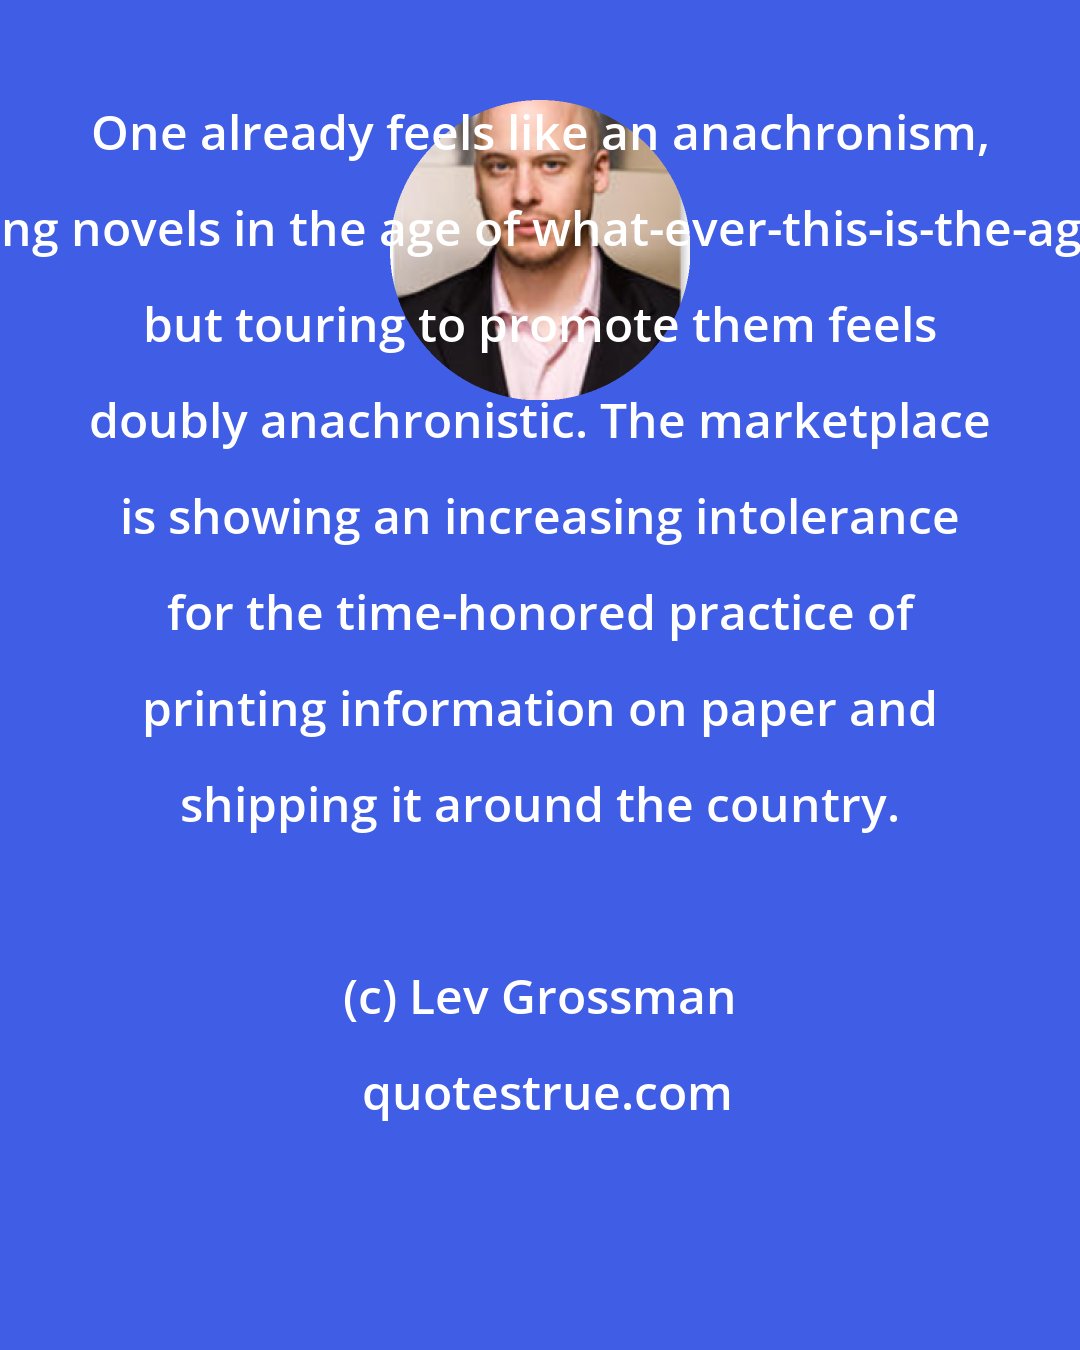 Lev Grossman: One already feels like an anachronism, writing novels in the age of what-ever-this-is-the-age-of, but touring to promote them feels doubly anachronistic. The marketplace is showing an increasing intolerance for the time-honored practice of printing information on paper and shipping it around the country.